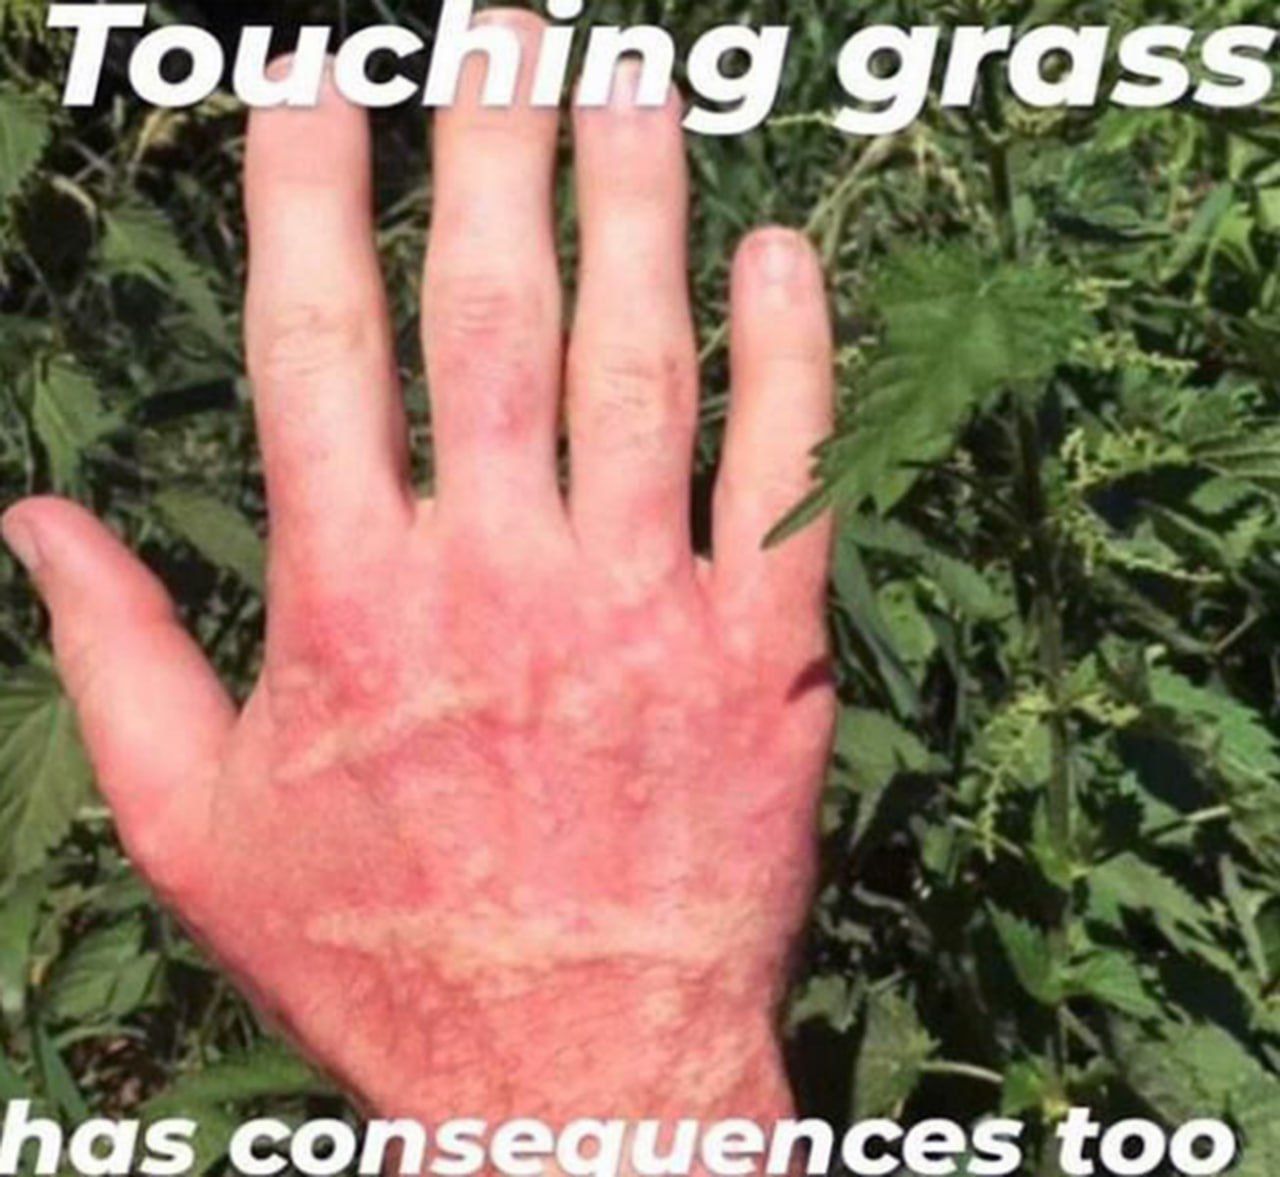 "Touch grass" they said...